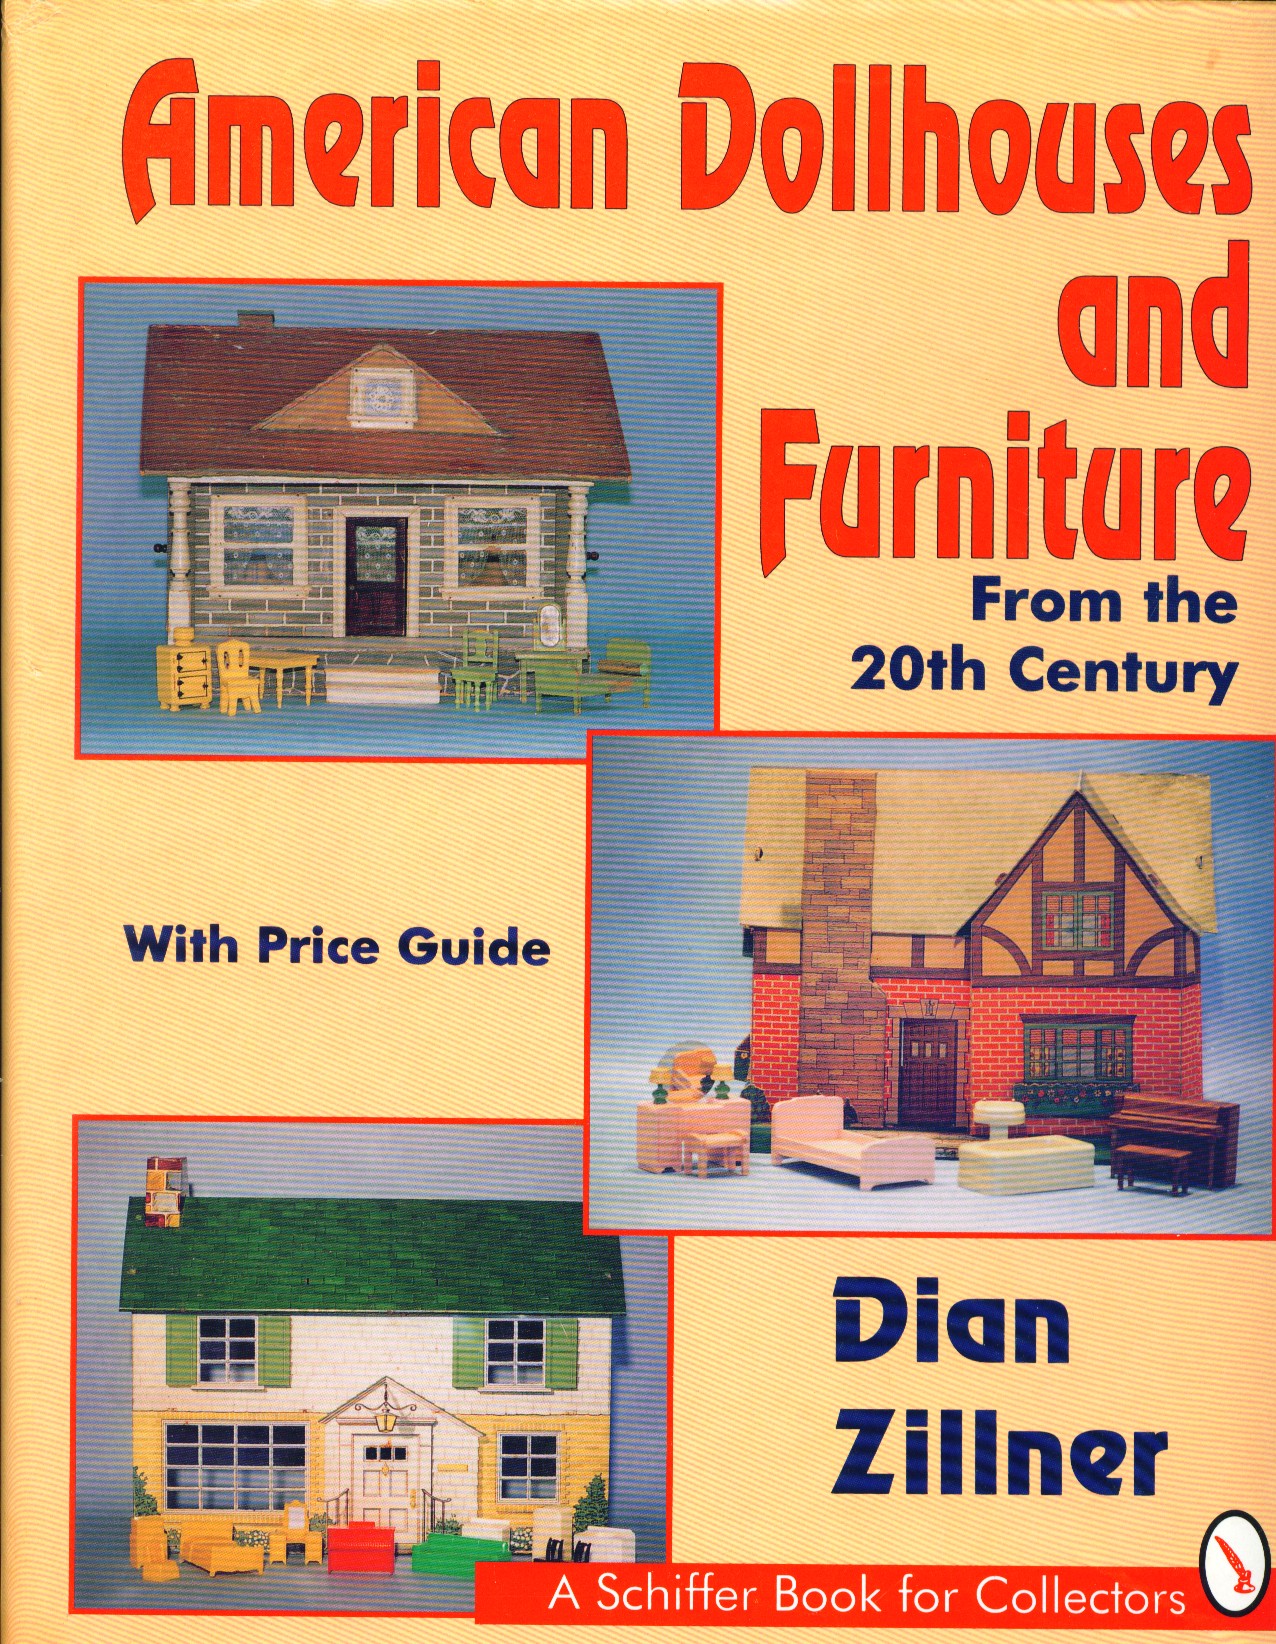 American dollhouses and furniture